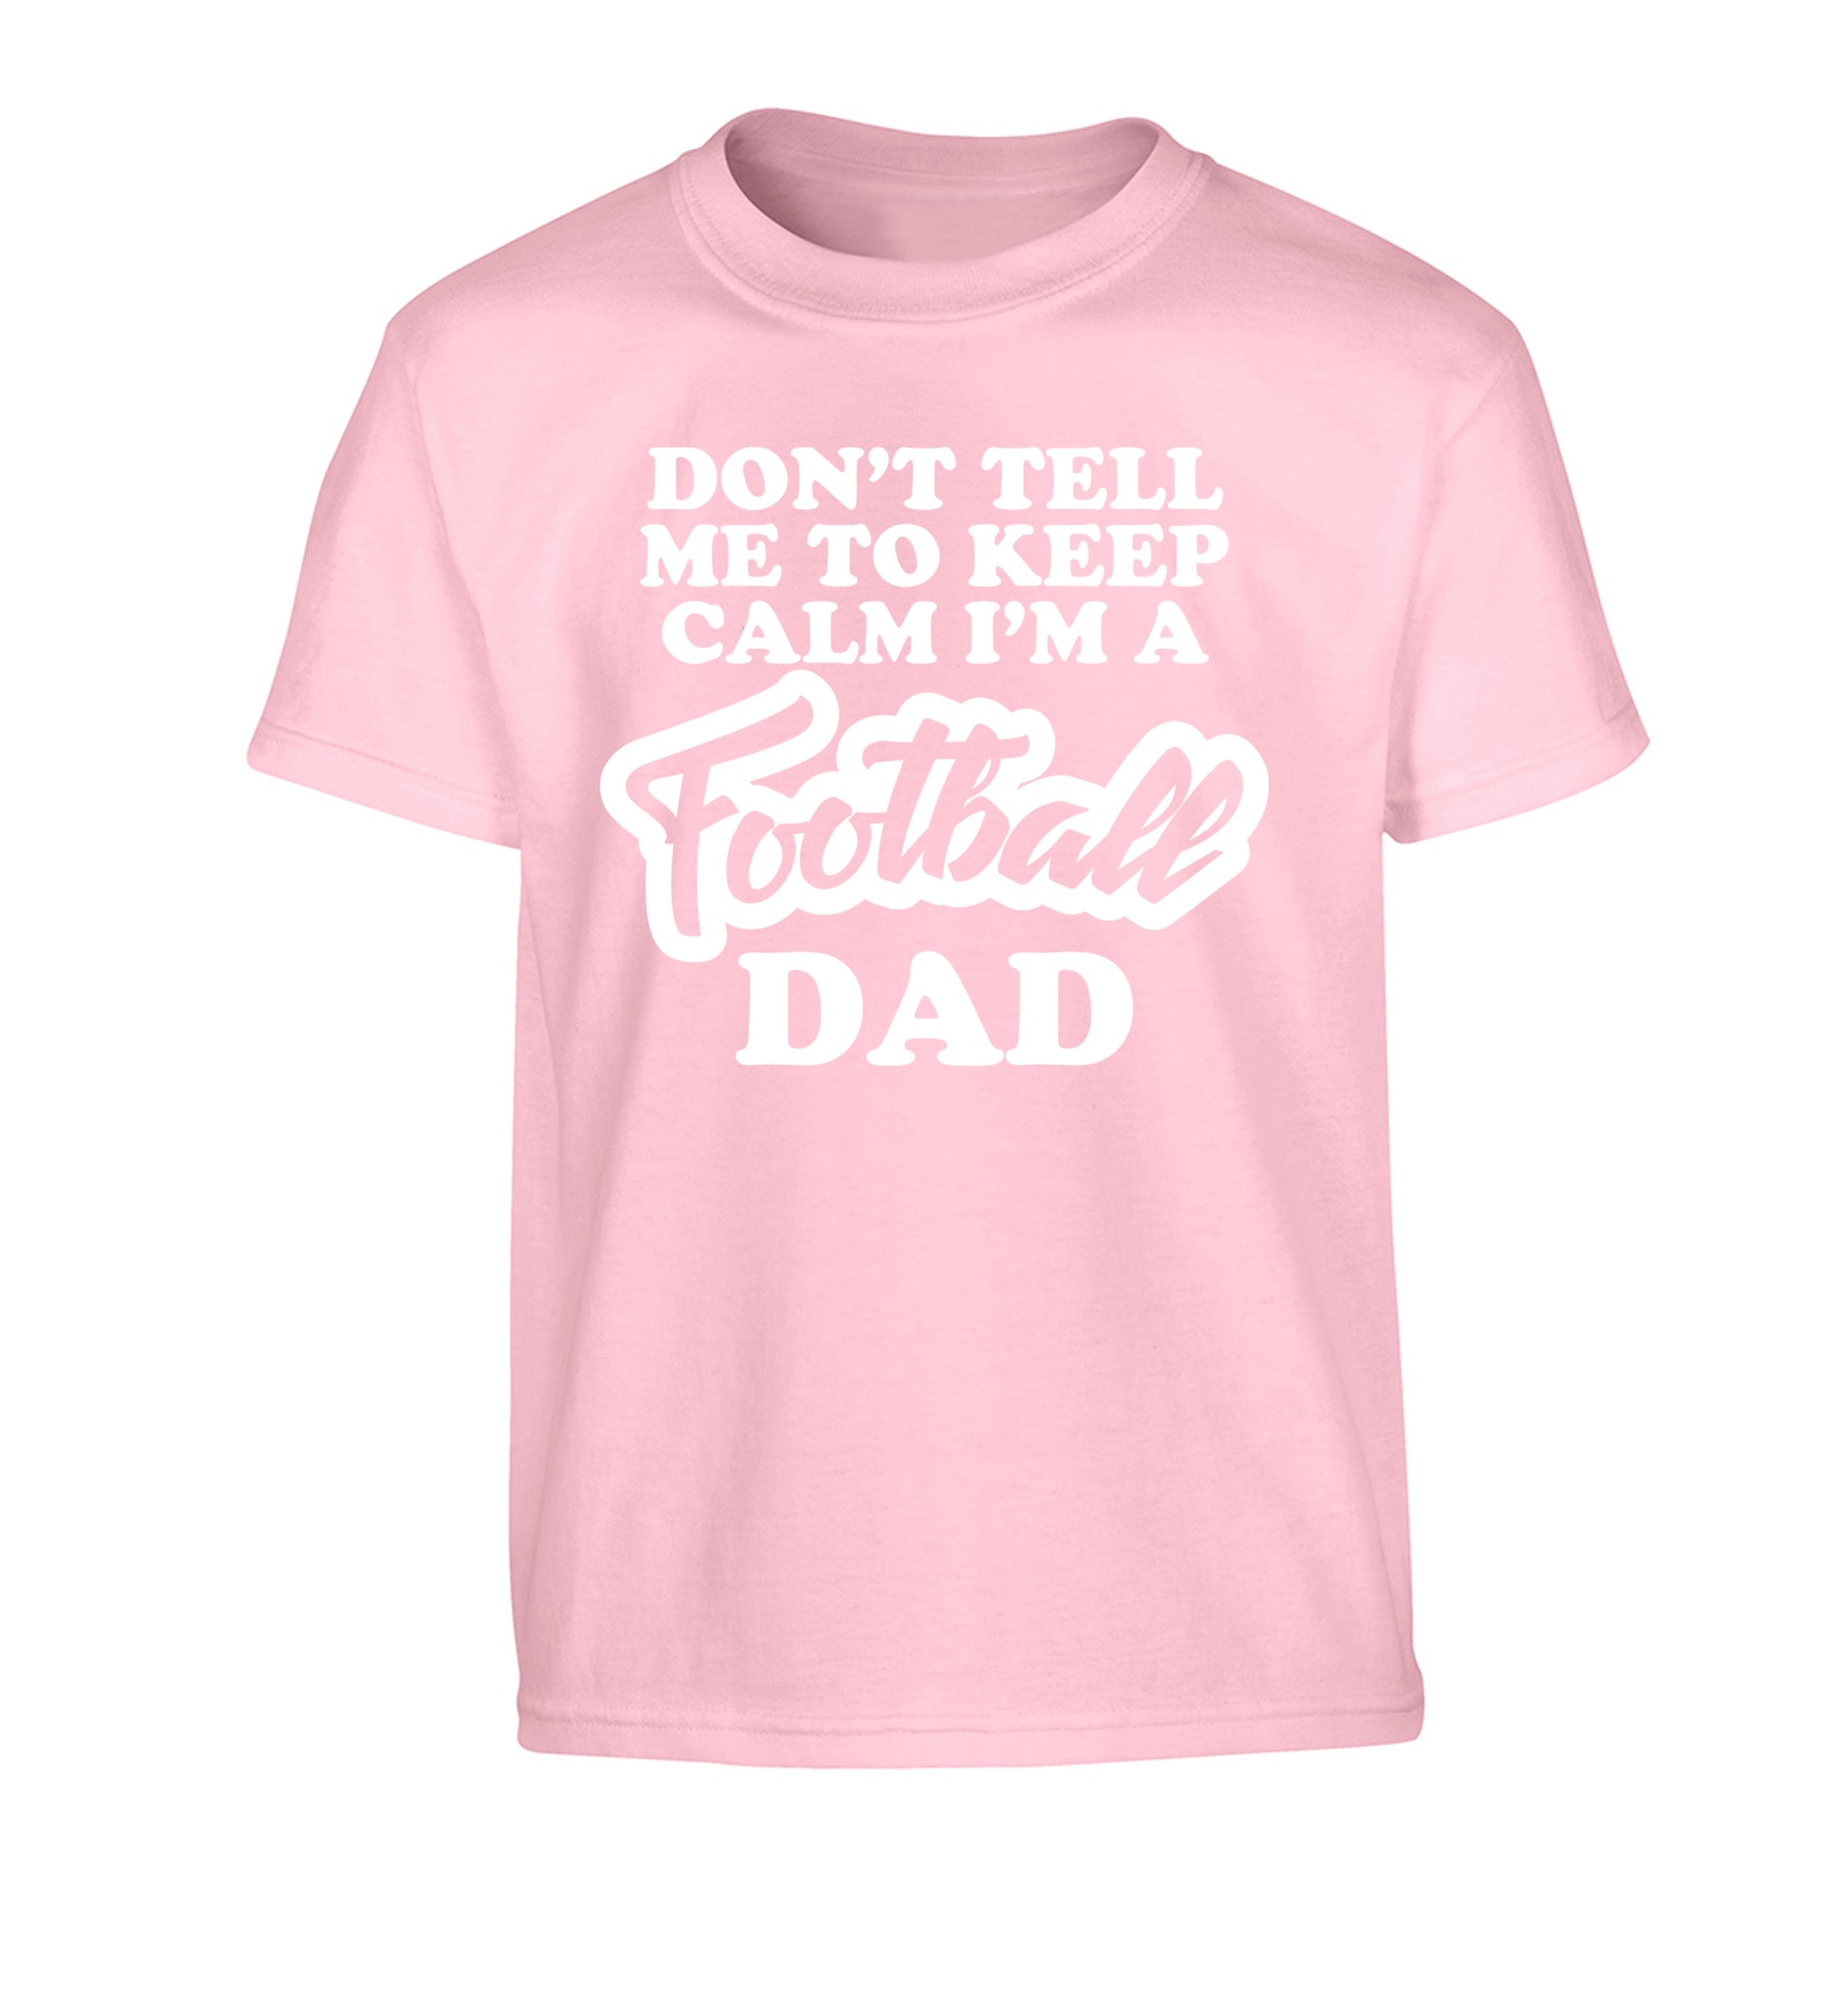 Don't tell me to keep calm I'm a football dad Children's light pink Tshirt 12-14 Years